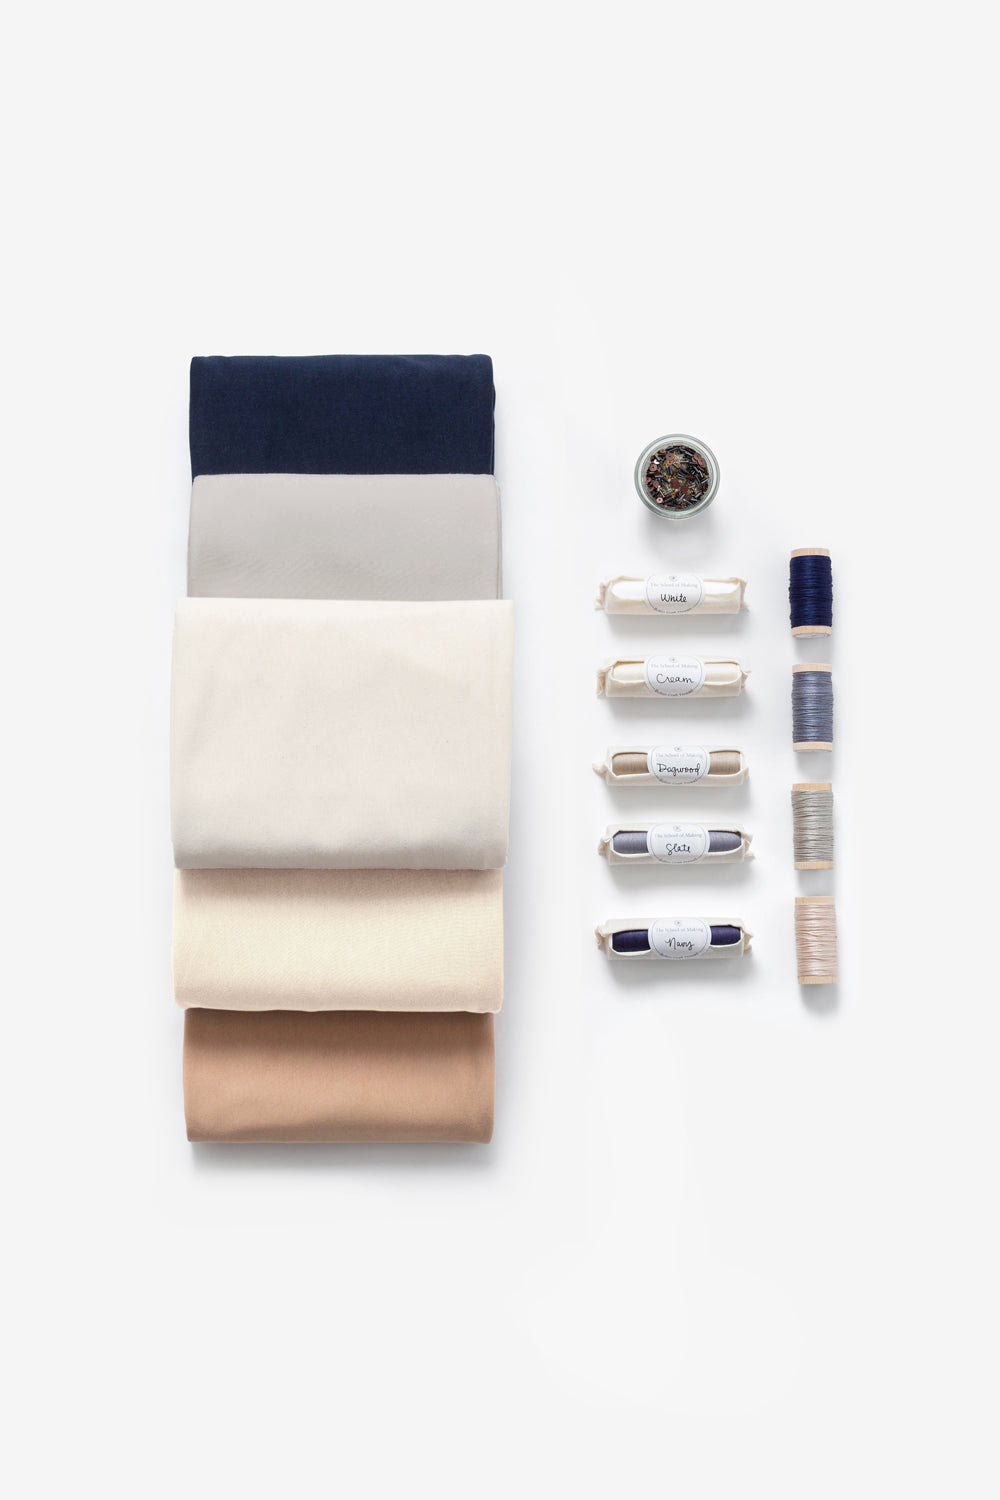 Fabric bundles in Navy, Sand, Natural, Beige, and Ballet, plus beads, thread, and floss.